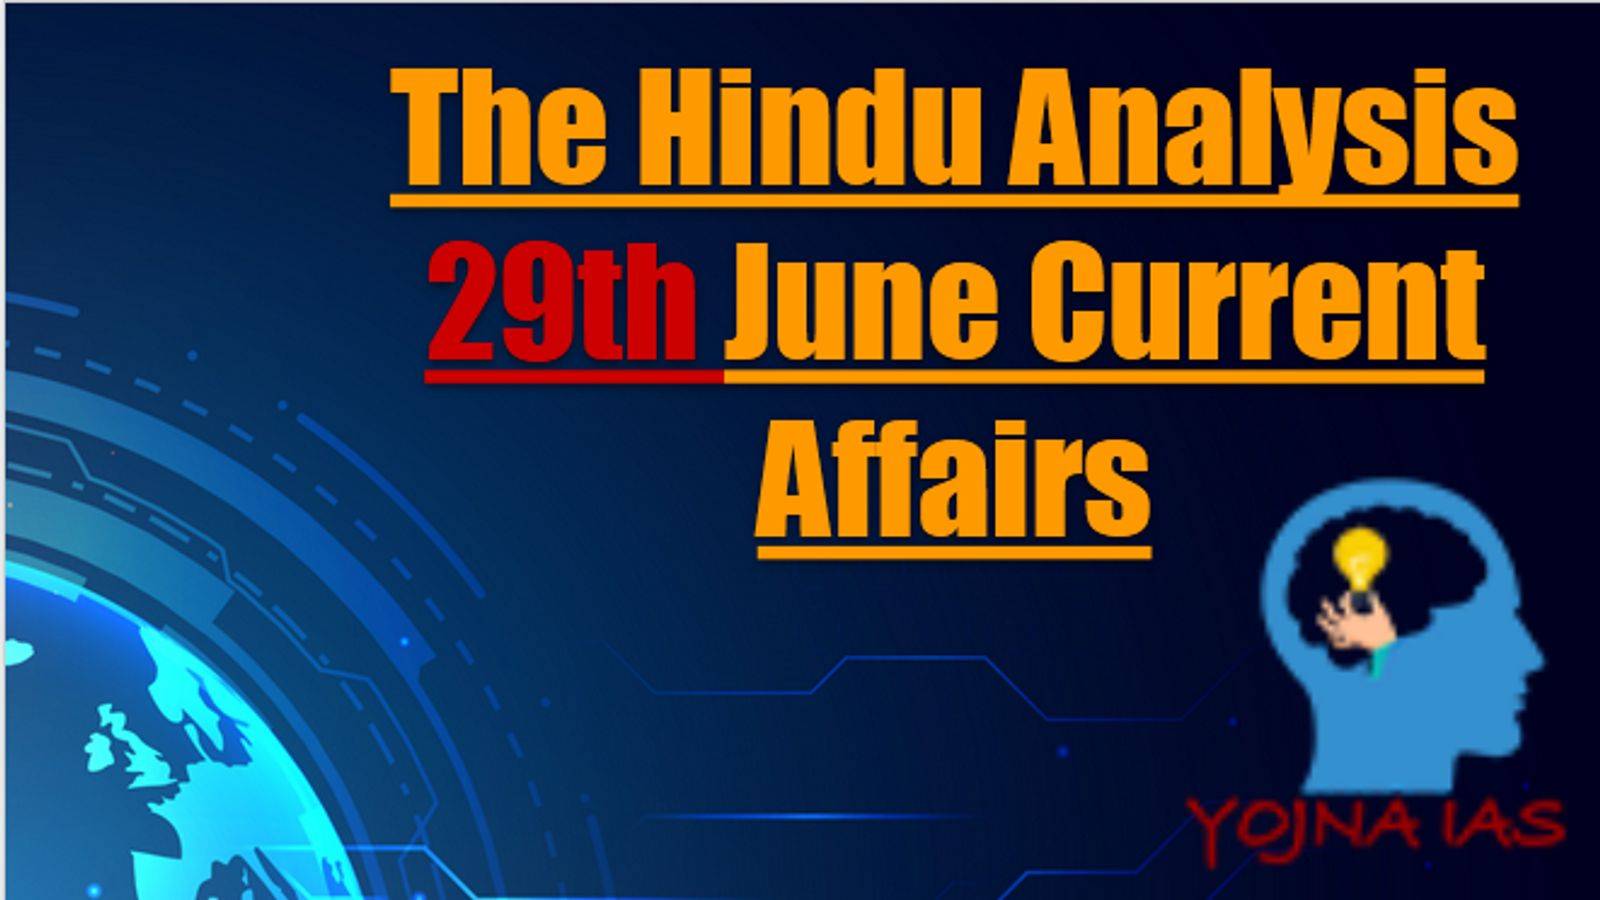 Today Current Affairs 29th June